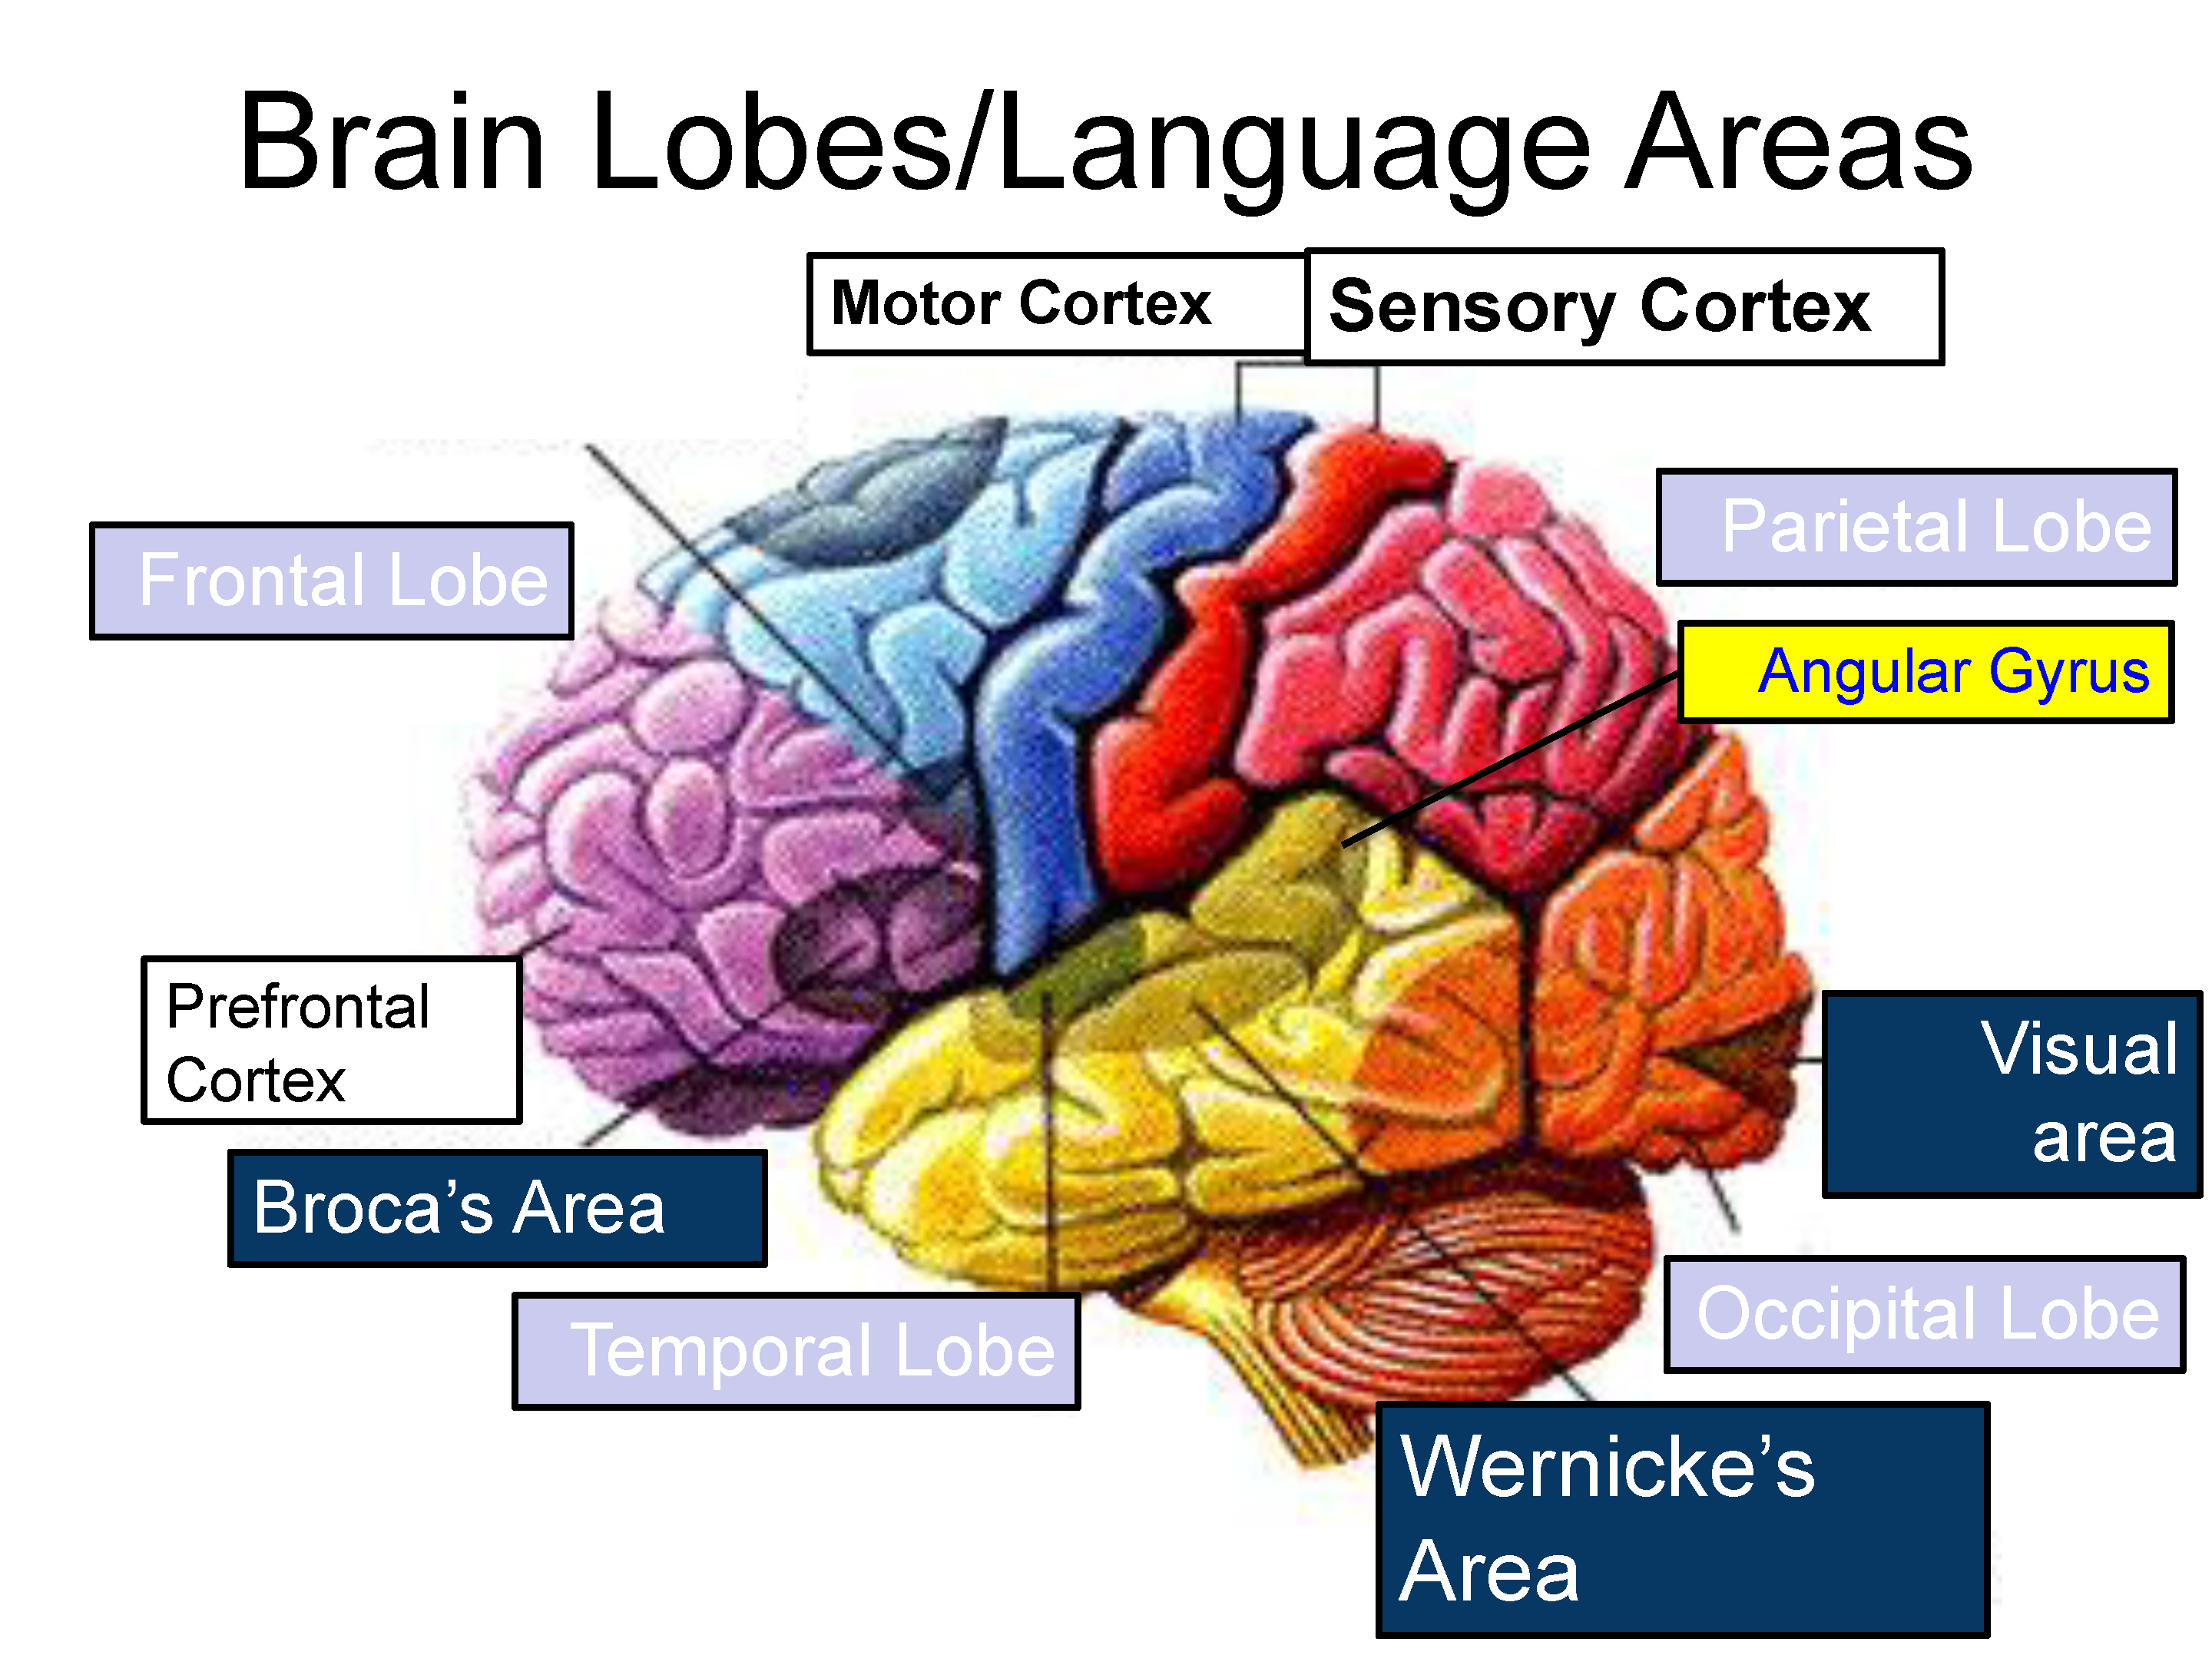 <p>a brain area involved in language comprehension and expression; usually in the left temporal lobe</p>